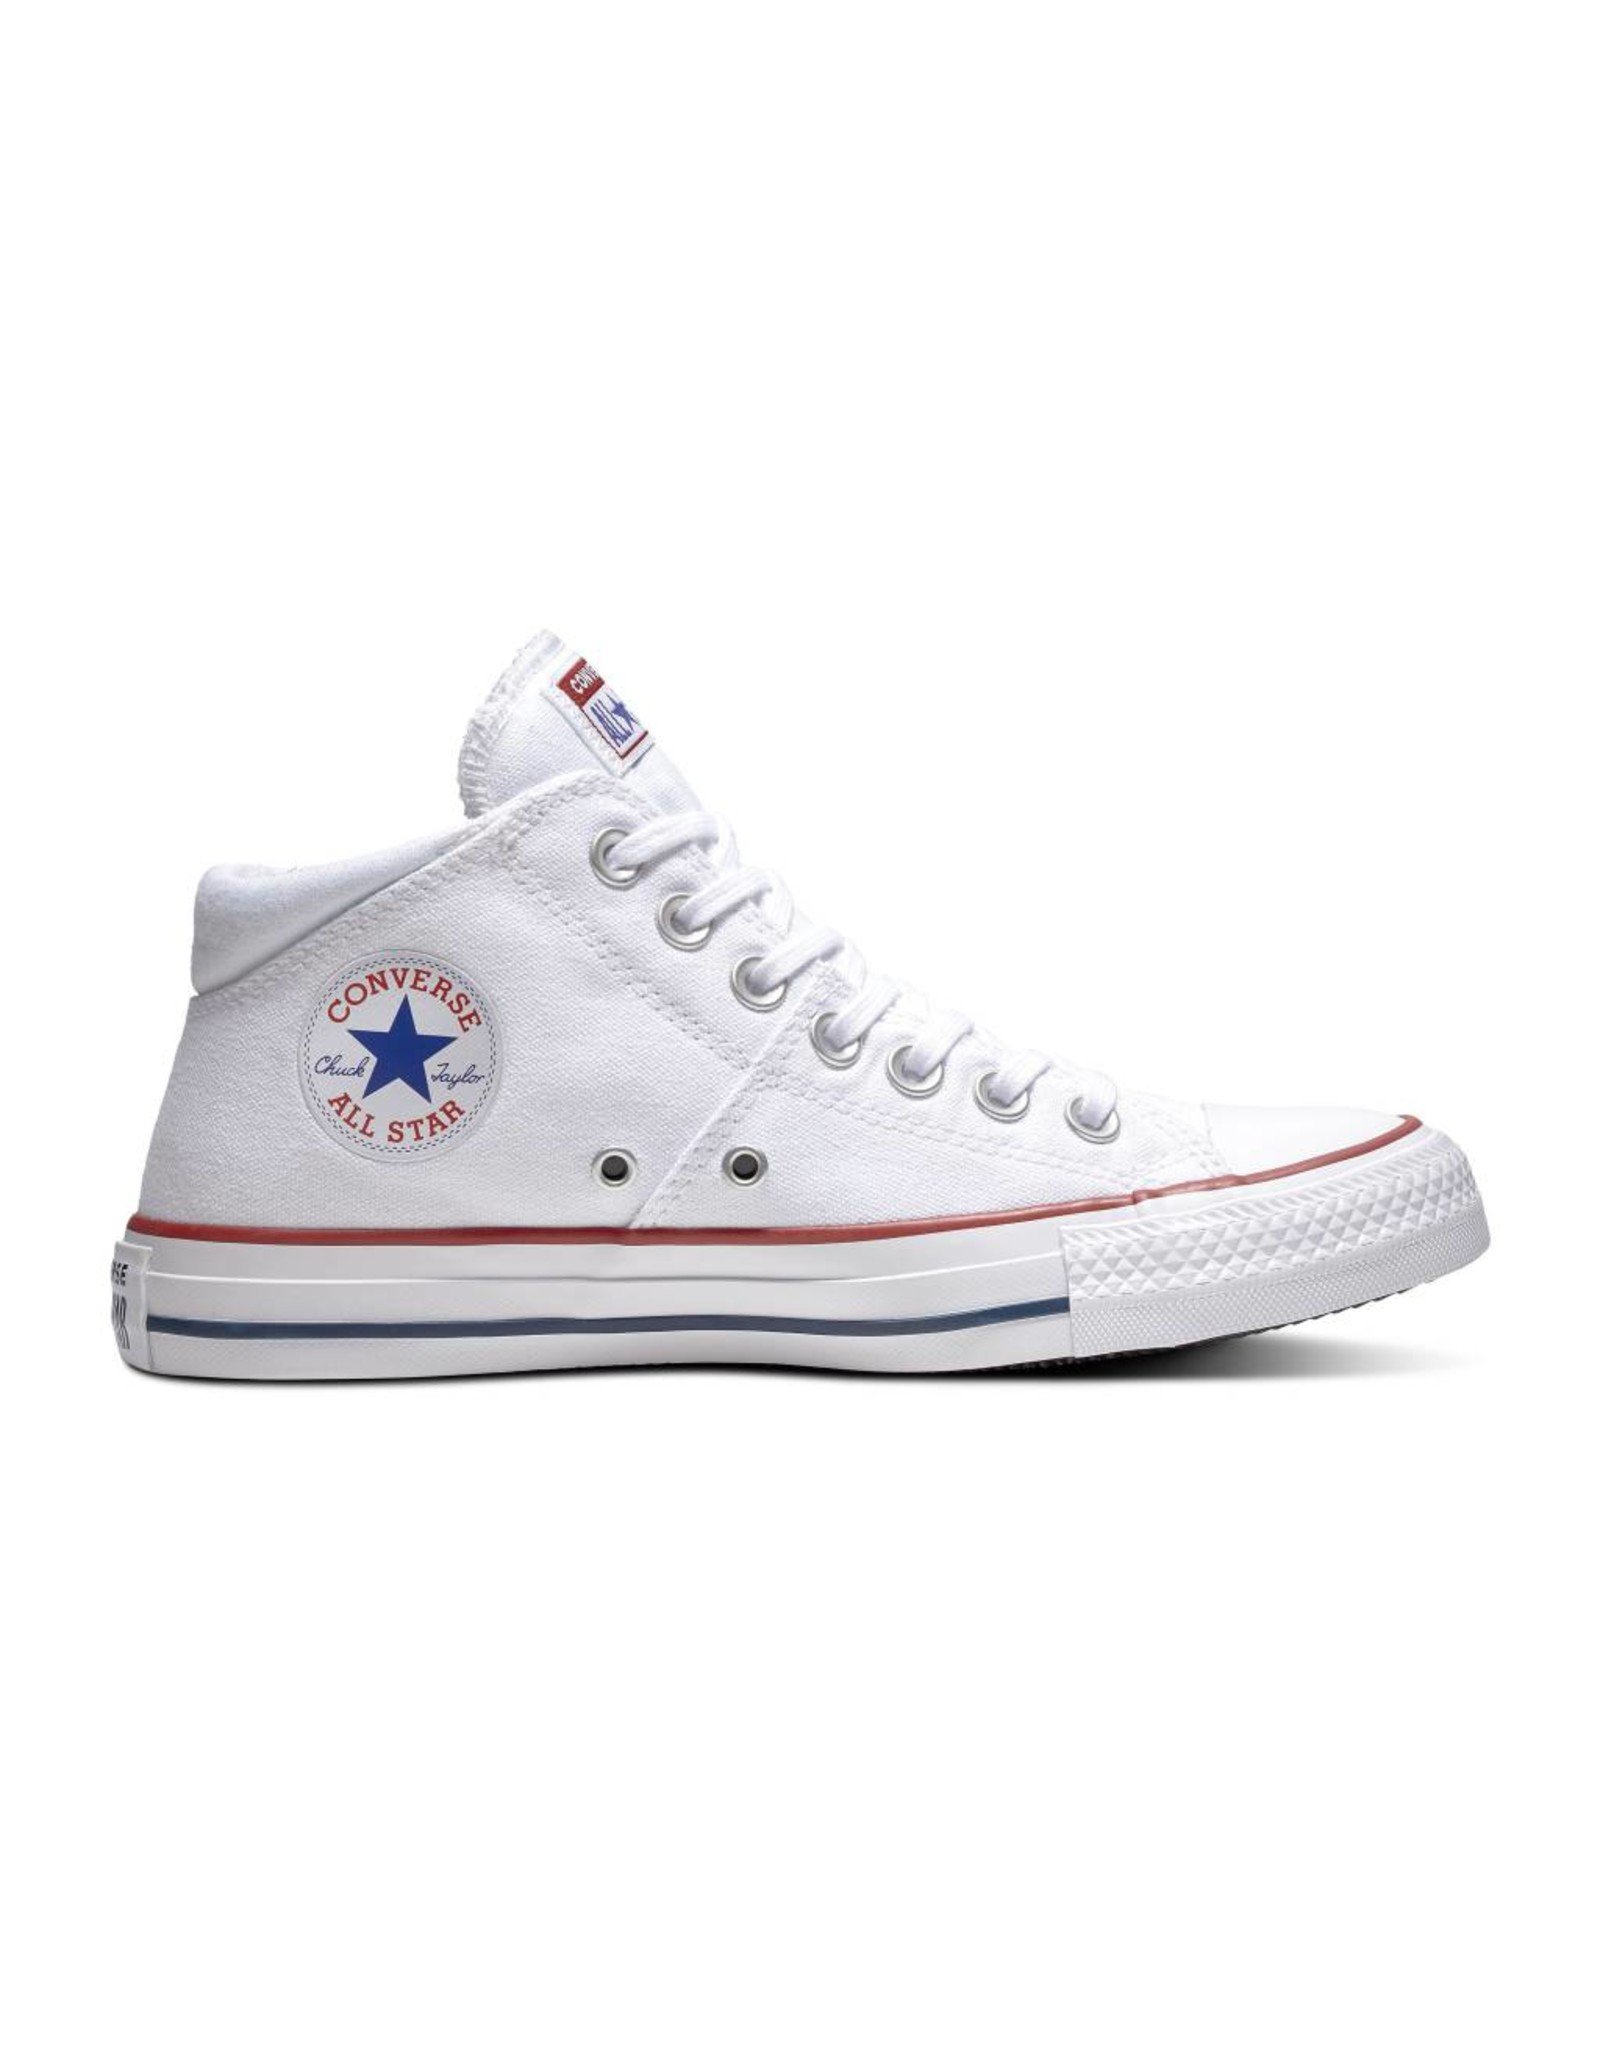 White Mid Converse Top Sellers, UP TO 64% OFF | www.moeembarcelona.com بيبي كريم للوجه